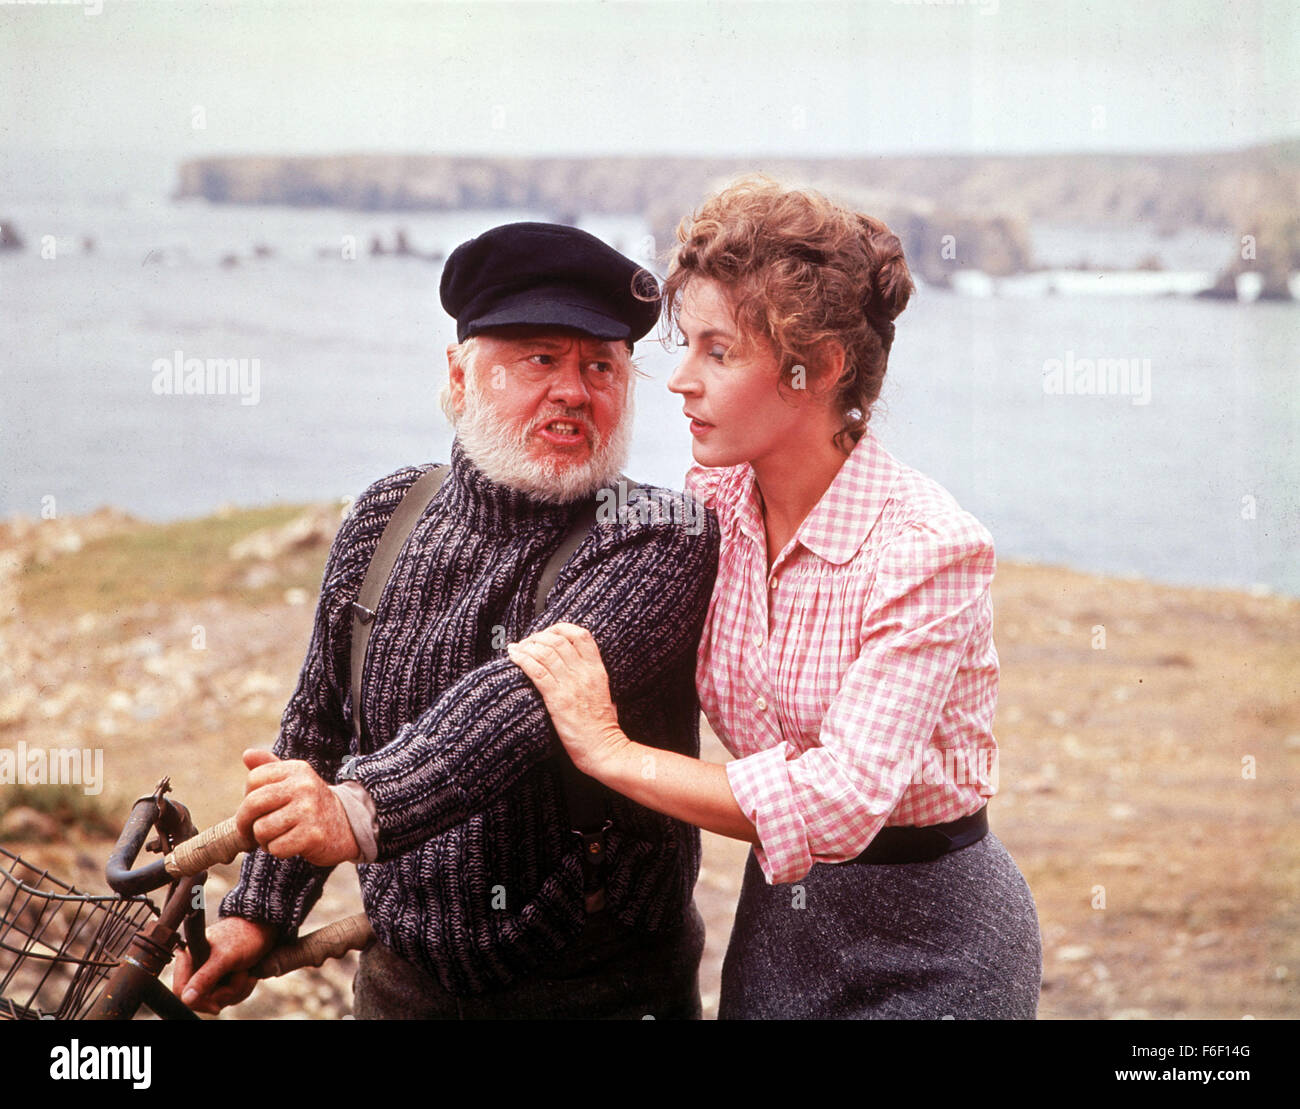 Nov 03, 1977; Burbank, CA, USA; MICKEY ROONEY and HELEN REDDY star as Lampie and Nora in the animated family musical 'Pete's Dragon' directed by Don Chaffey. Stock Photo